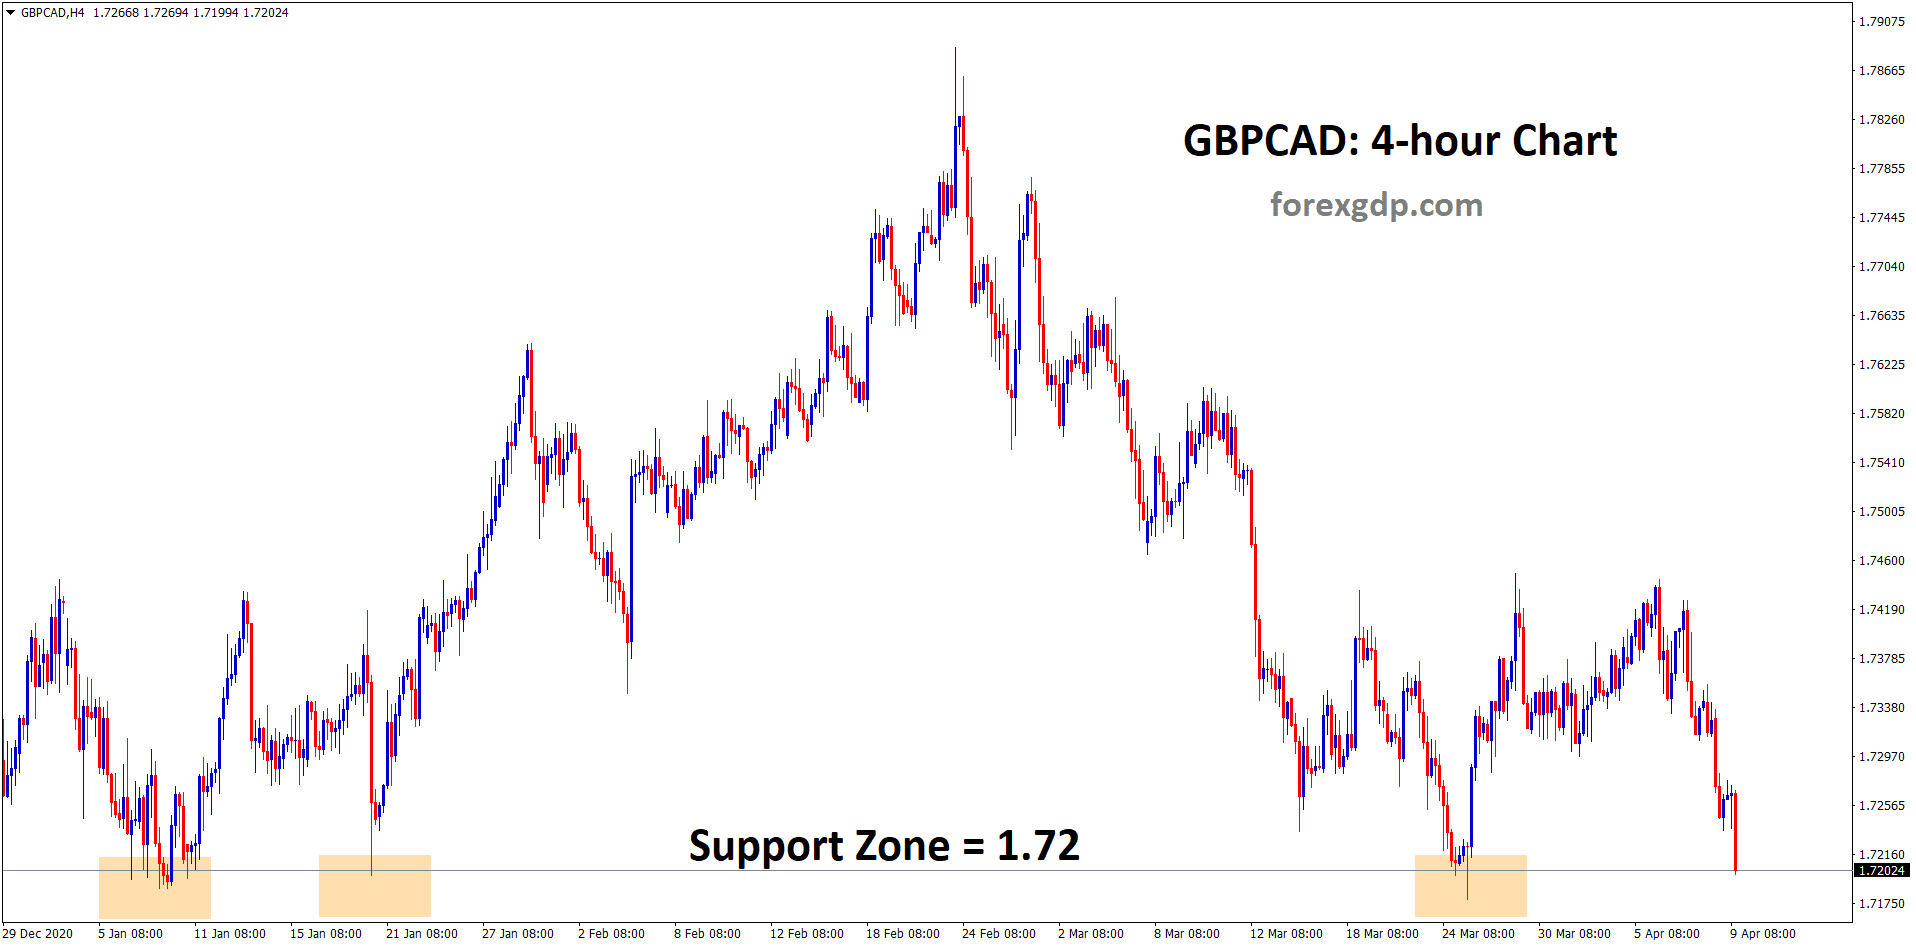 gbpcad reached the support zone 1.72 for the 4th time